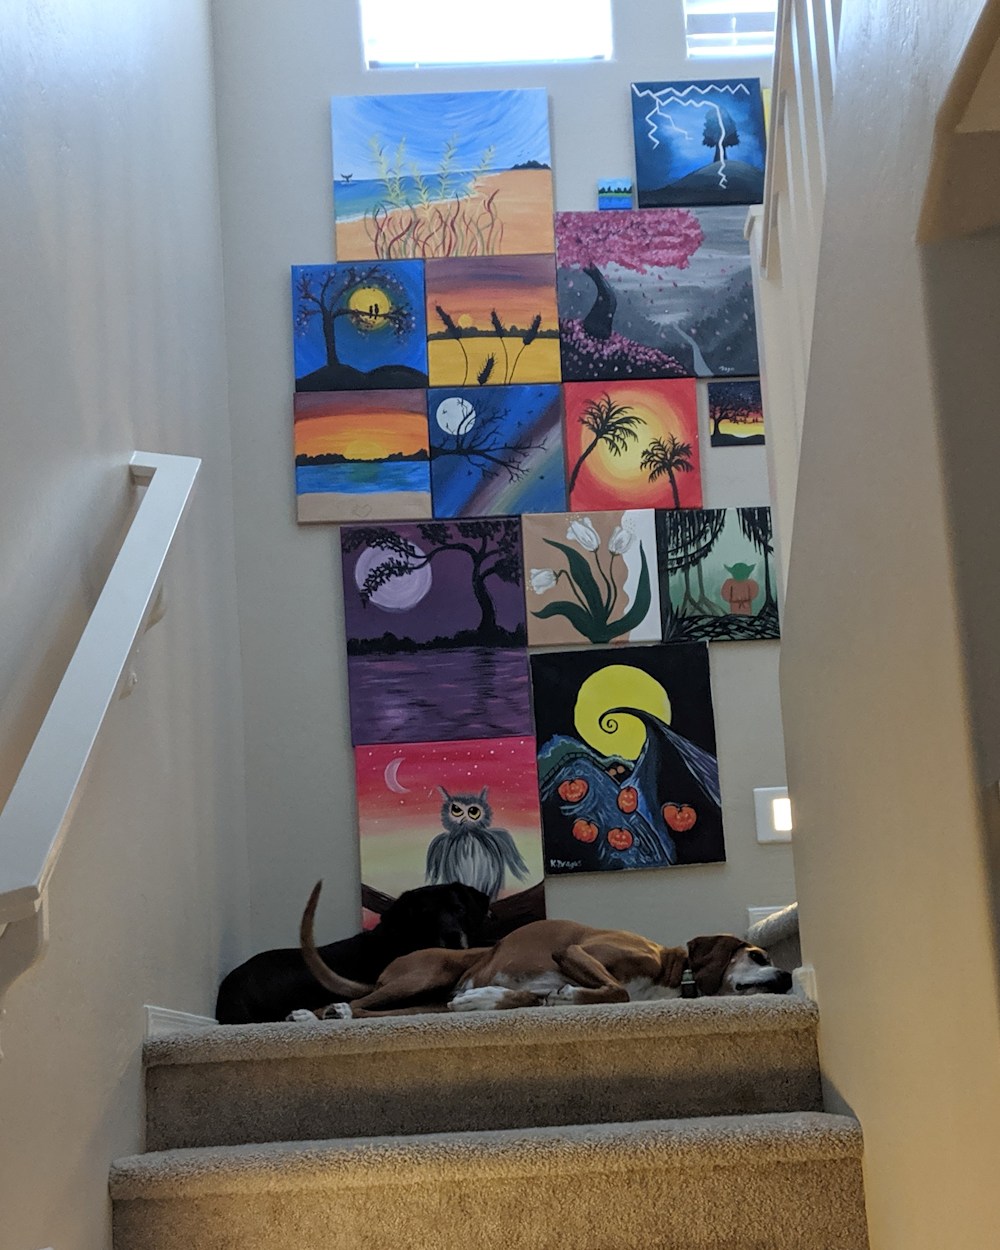 My gallery wall on the landing of my home.